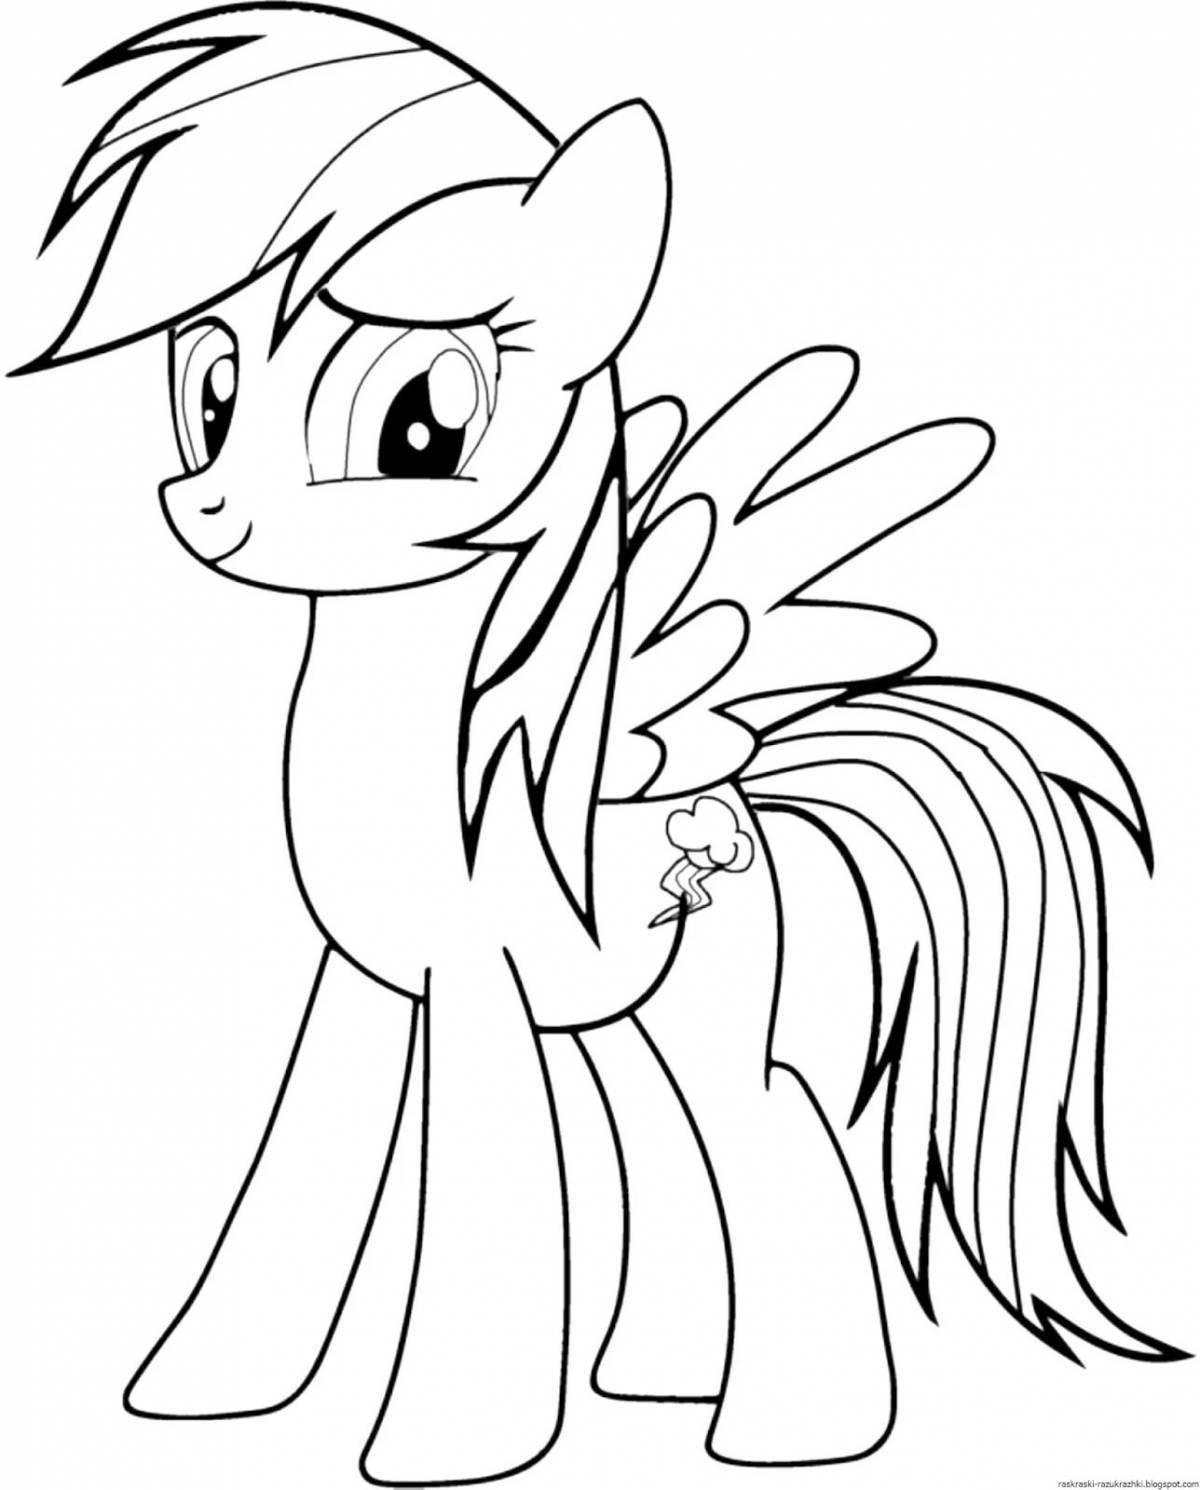 Coloring book shining pony light